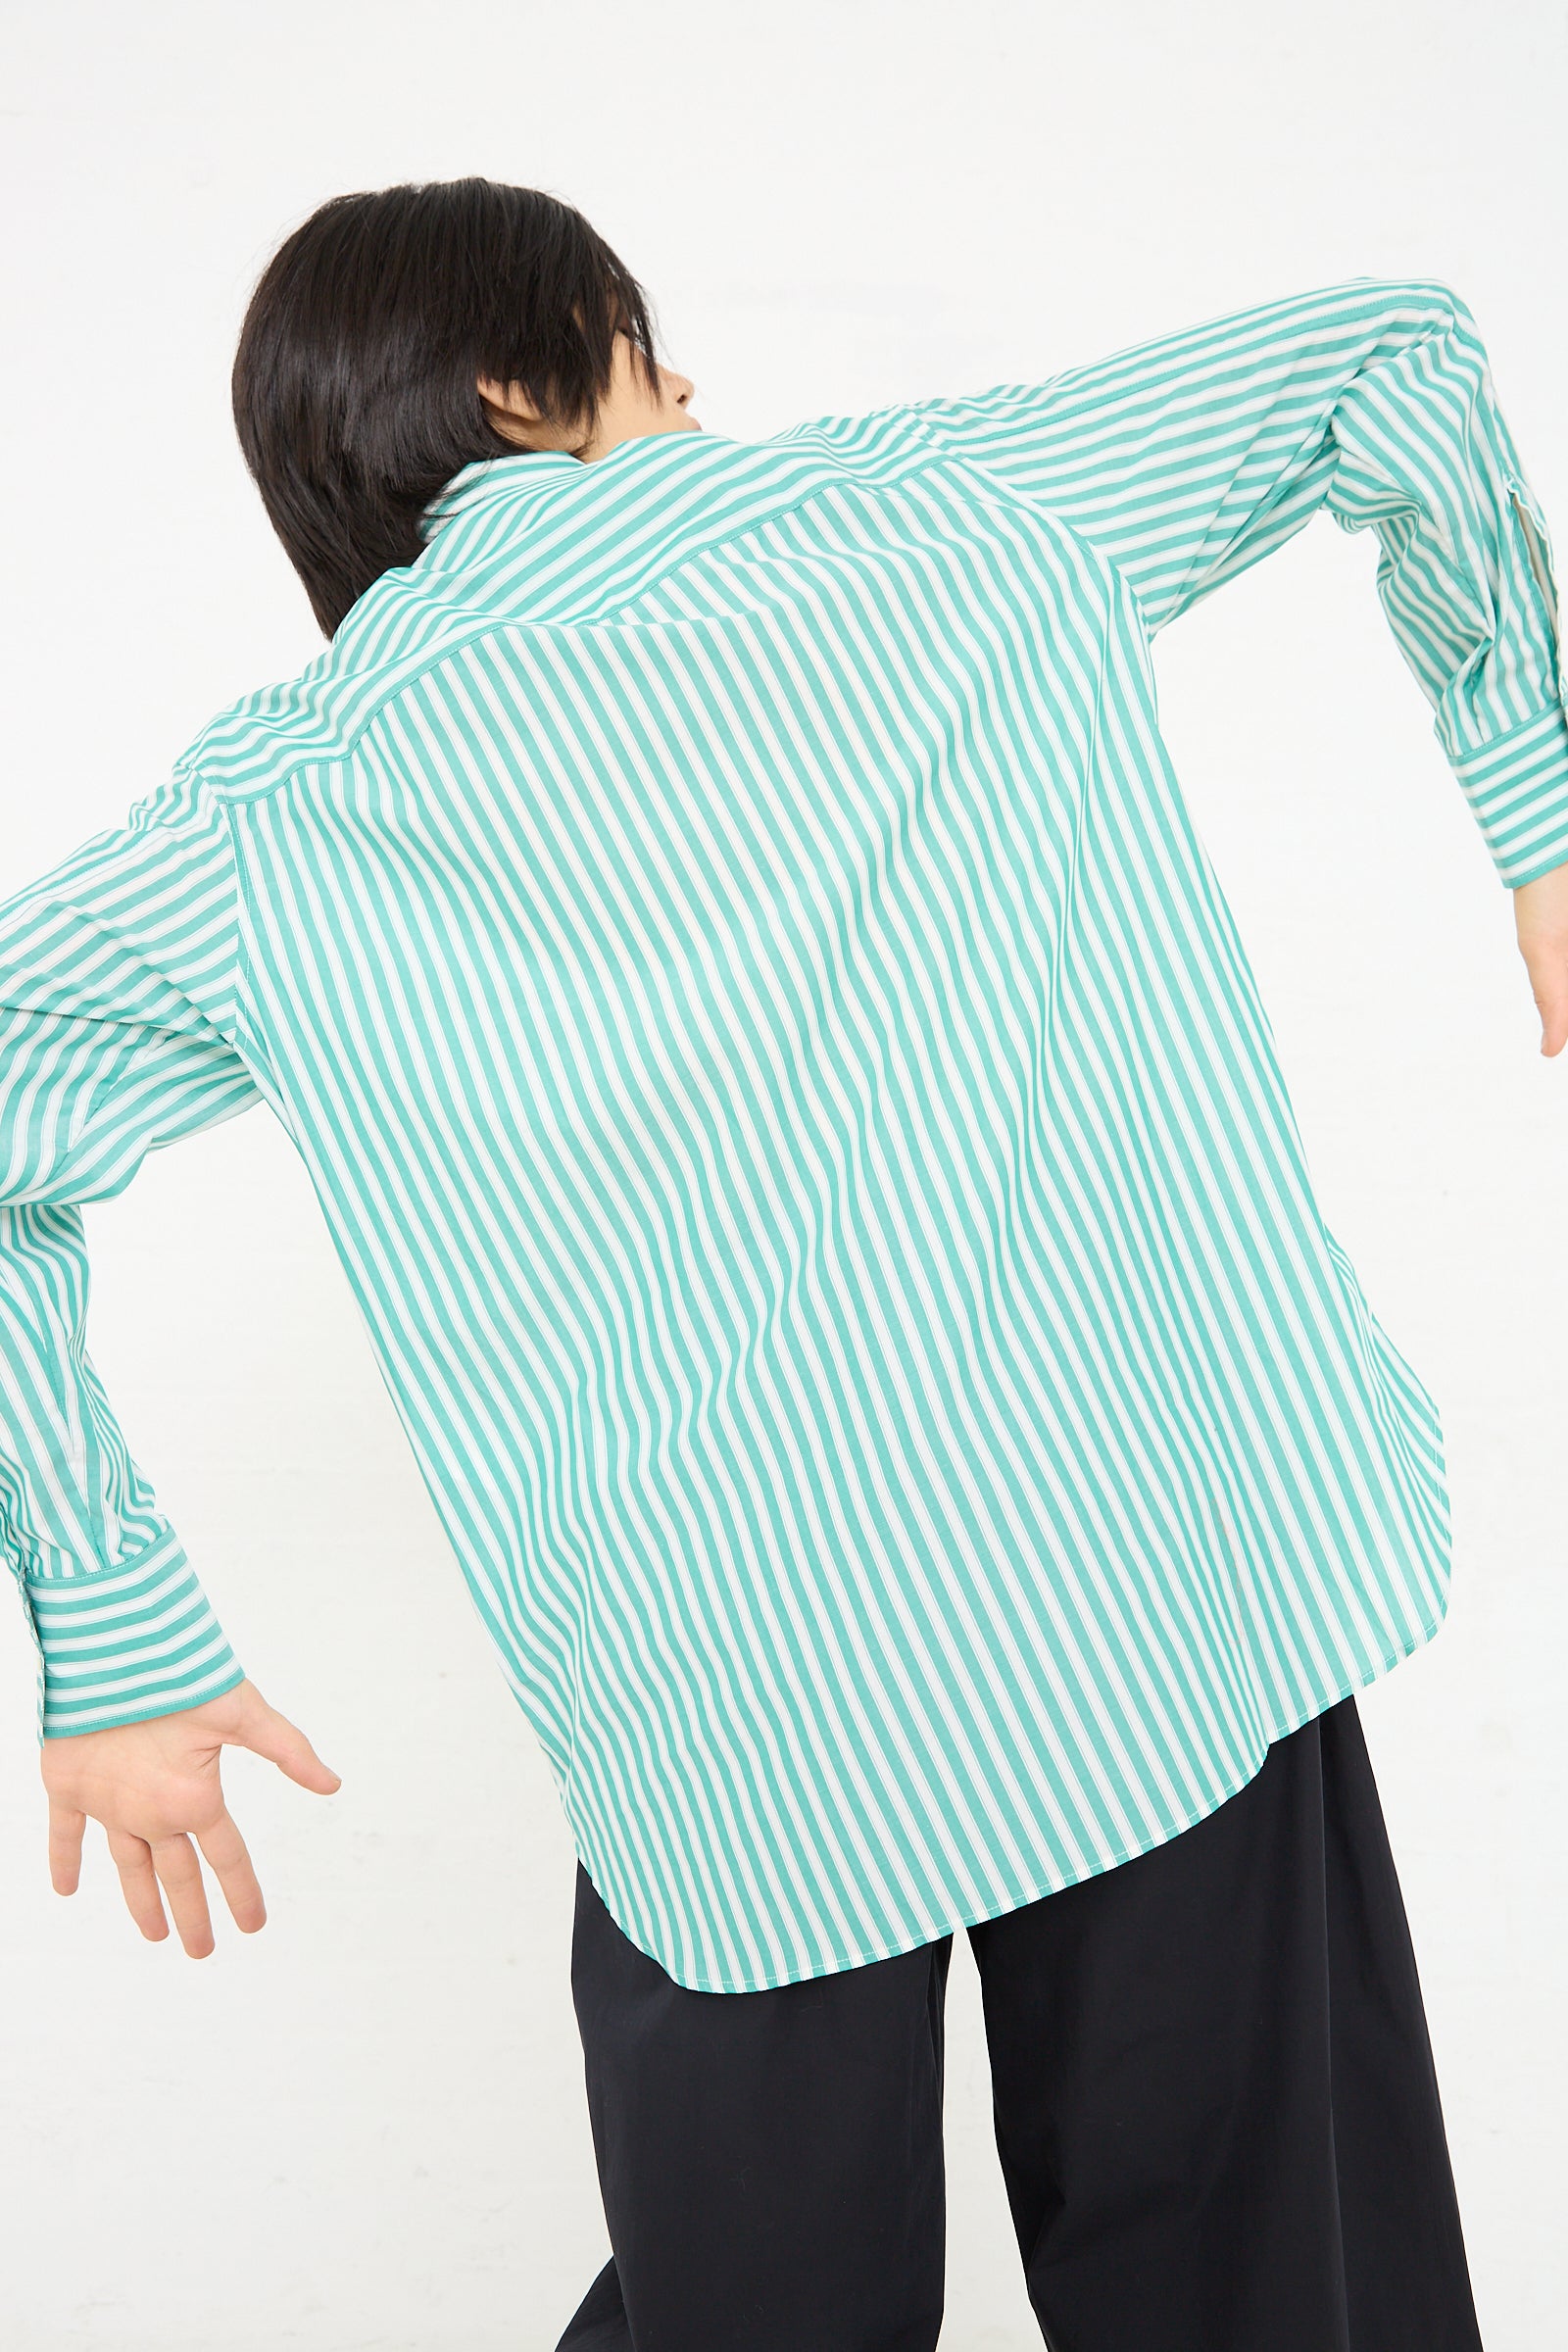 A person facing away from the camera wearing a Santos Overshirt in Green and Cream by Studio Nicholson and black trousers.